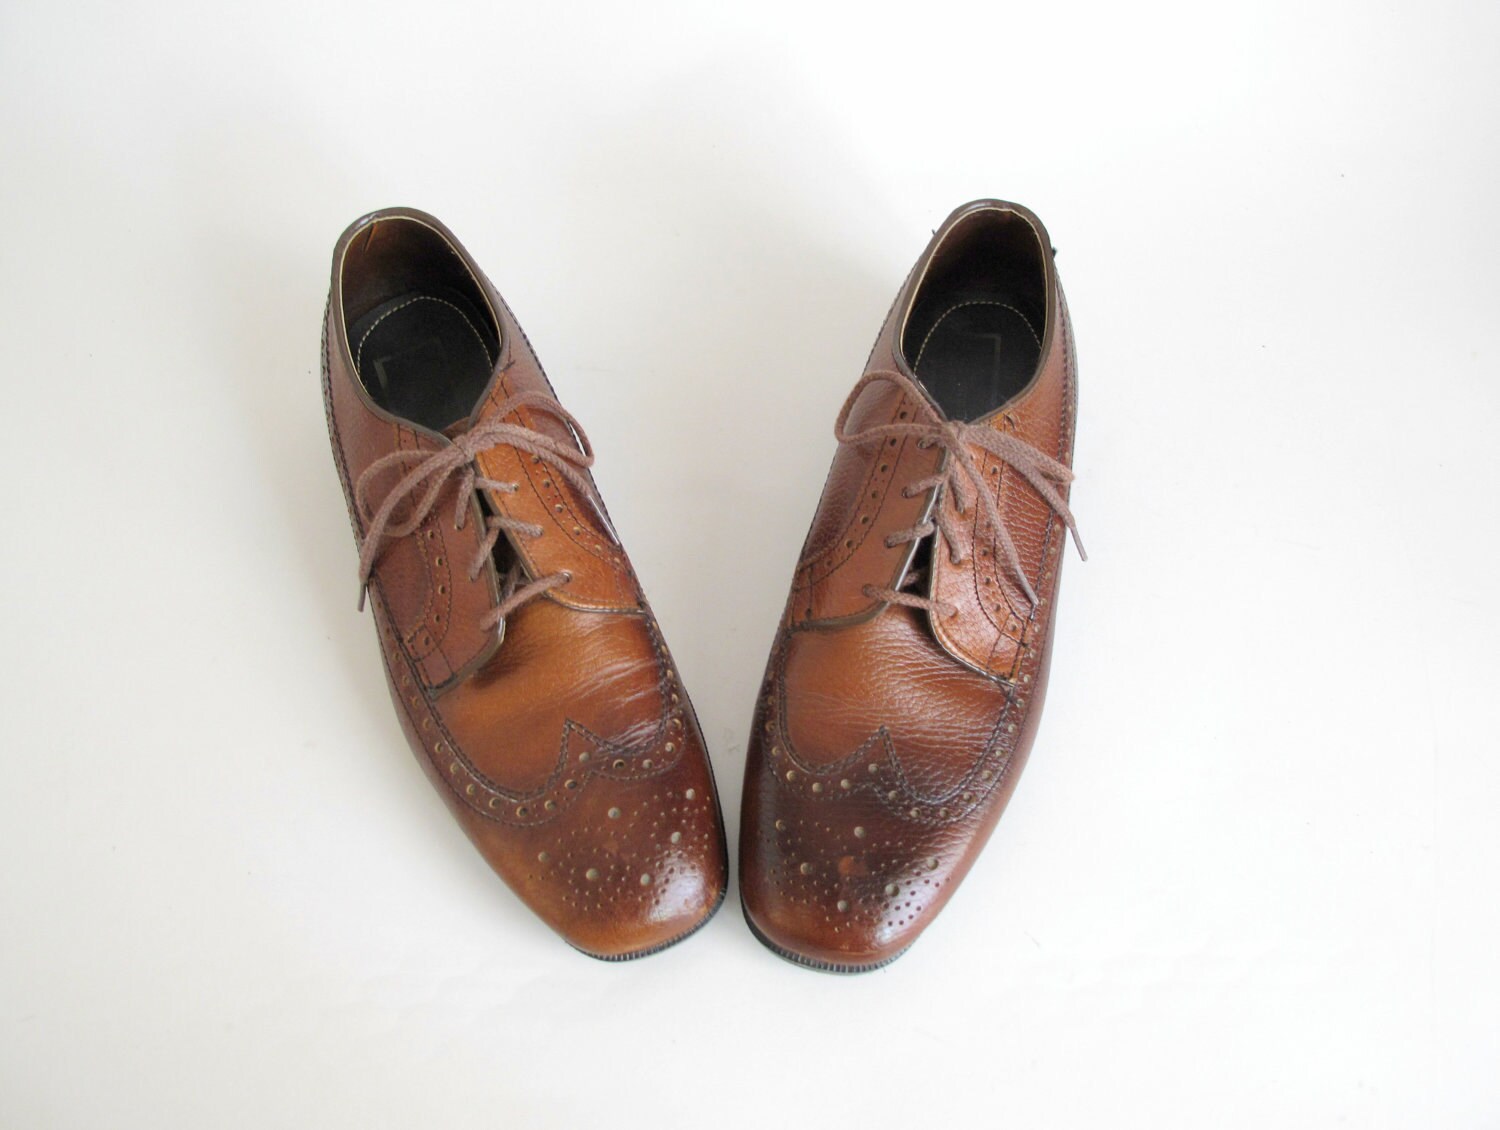 Vintage 1960s MENS Shoes : Brown Wingtips Rockabilly Size 9